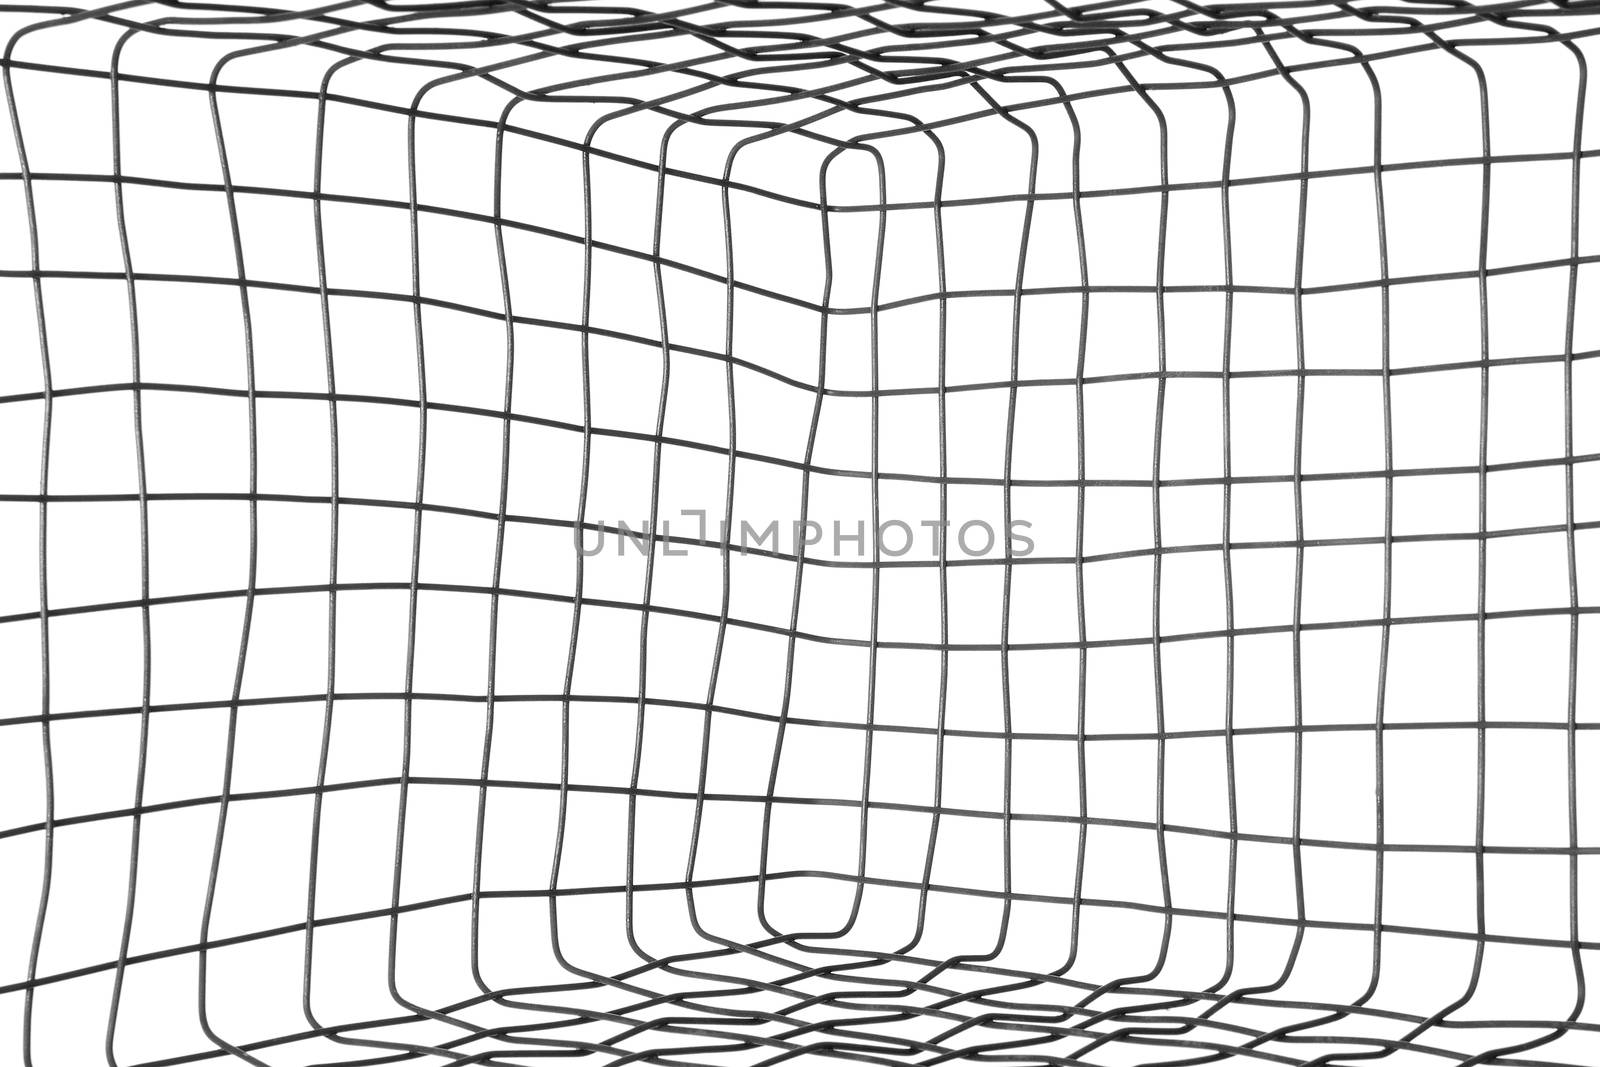 Inside the metal cage. Metal grid isolated on white background.